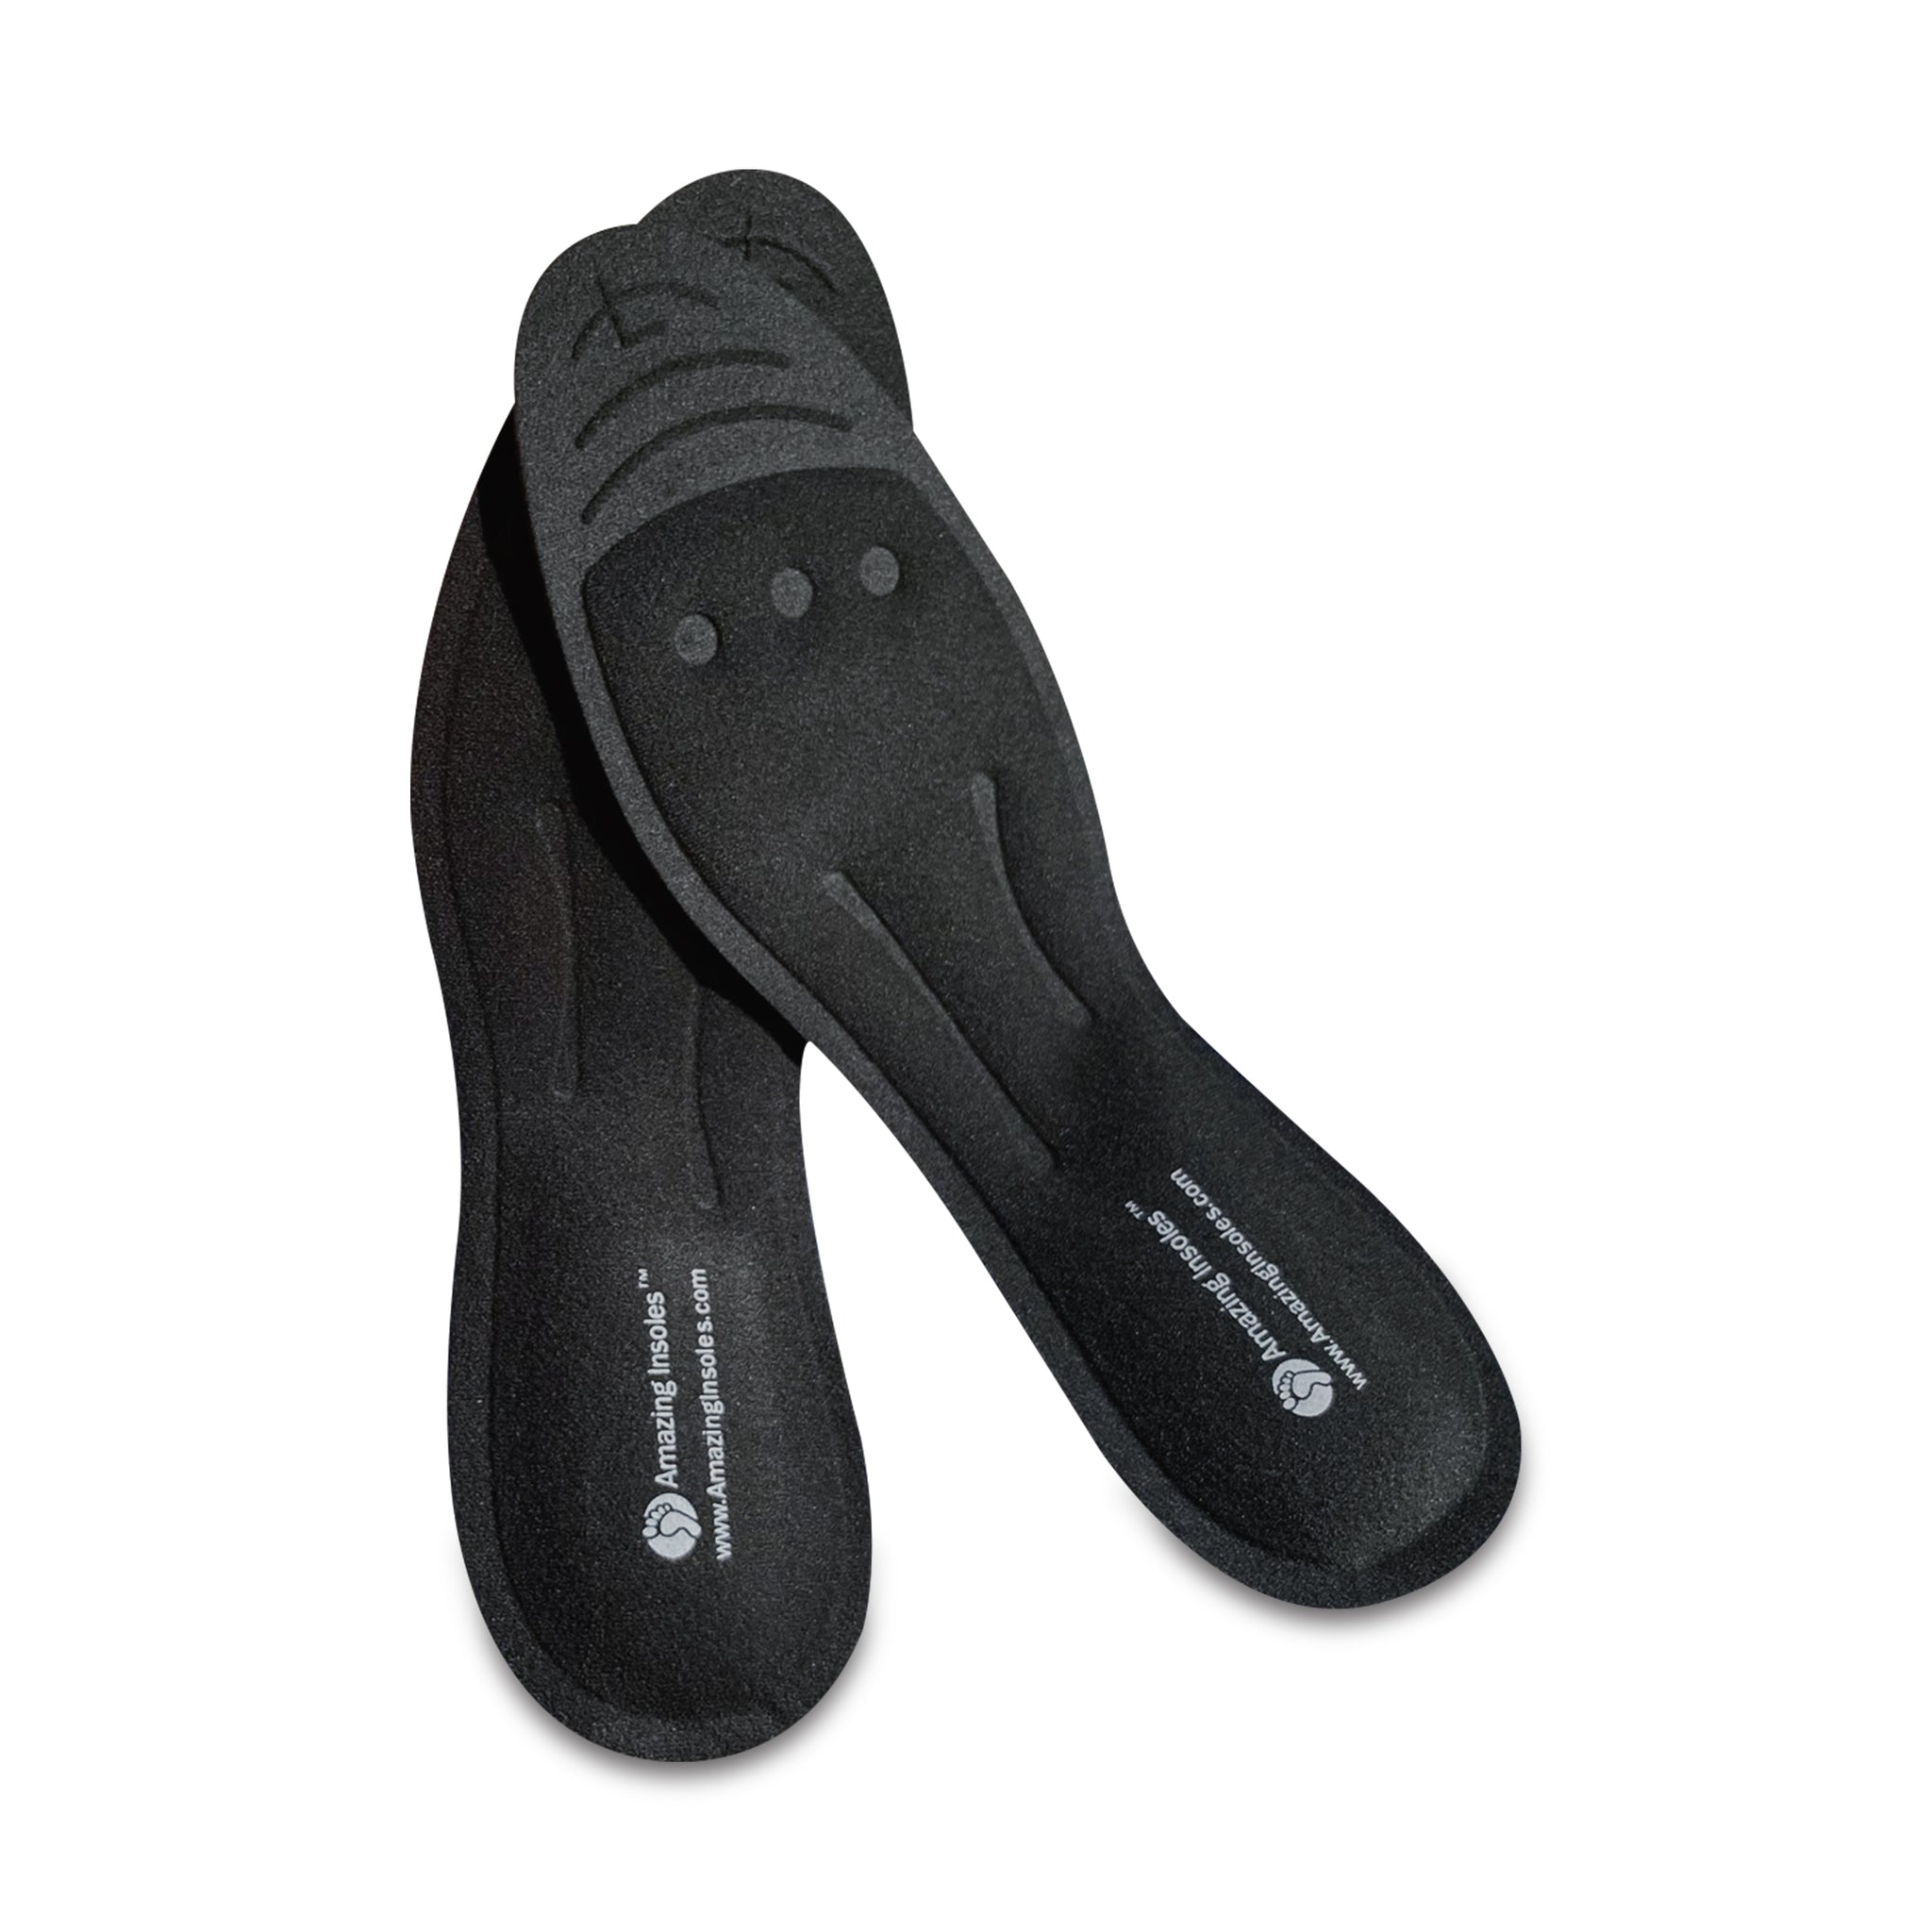 Heel Spur Cushions | Shoe Inserts for Foot Pain Relief While Walking